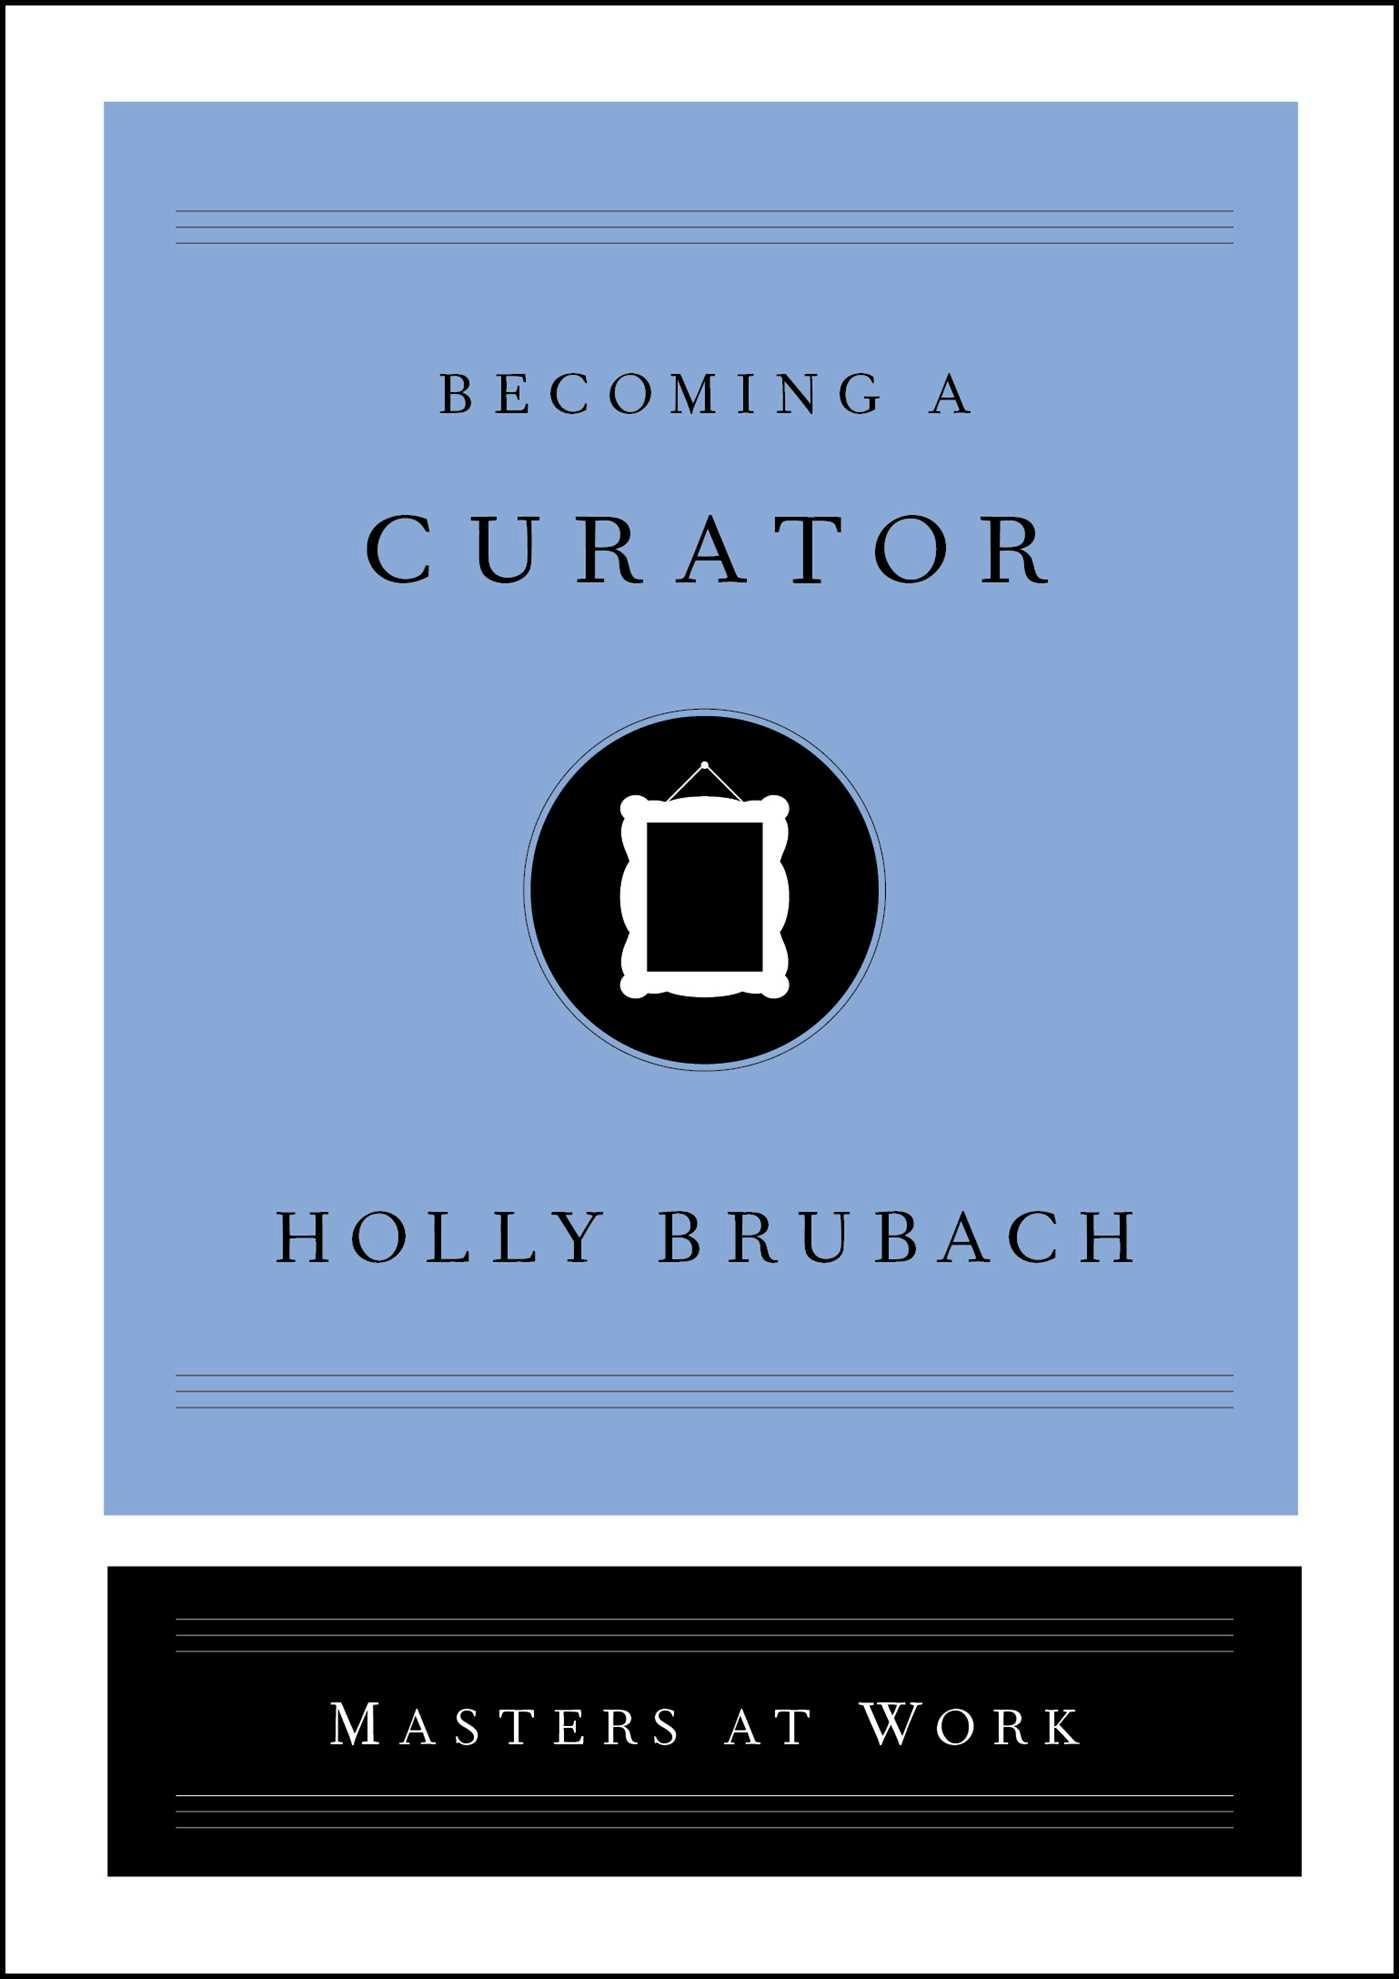 Becoming a Curator - Holly Brubach